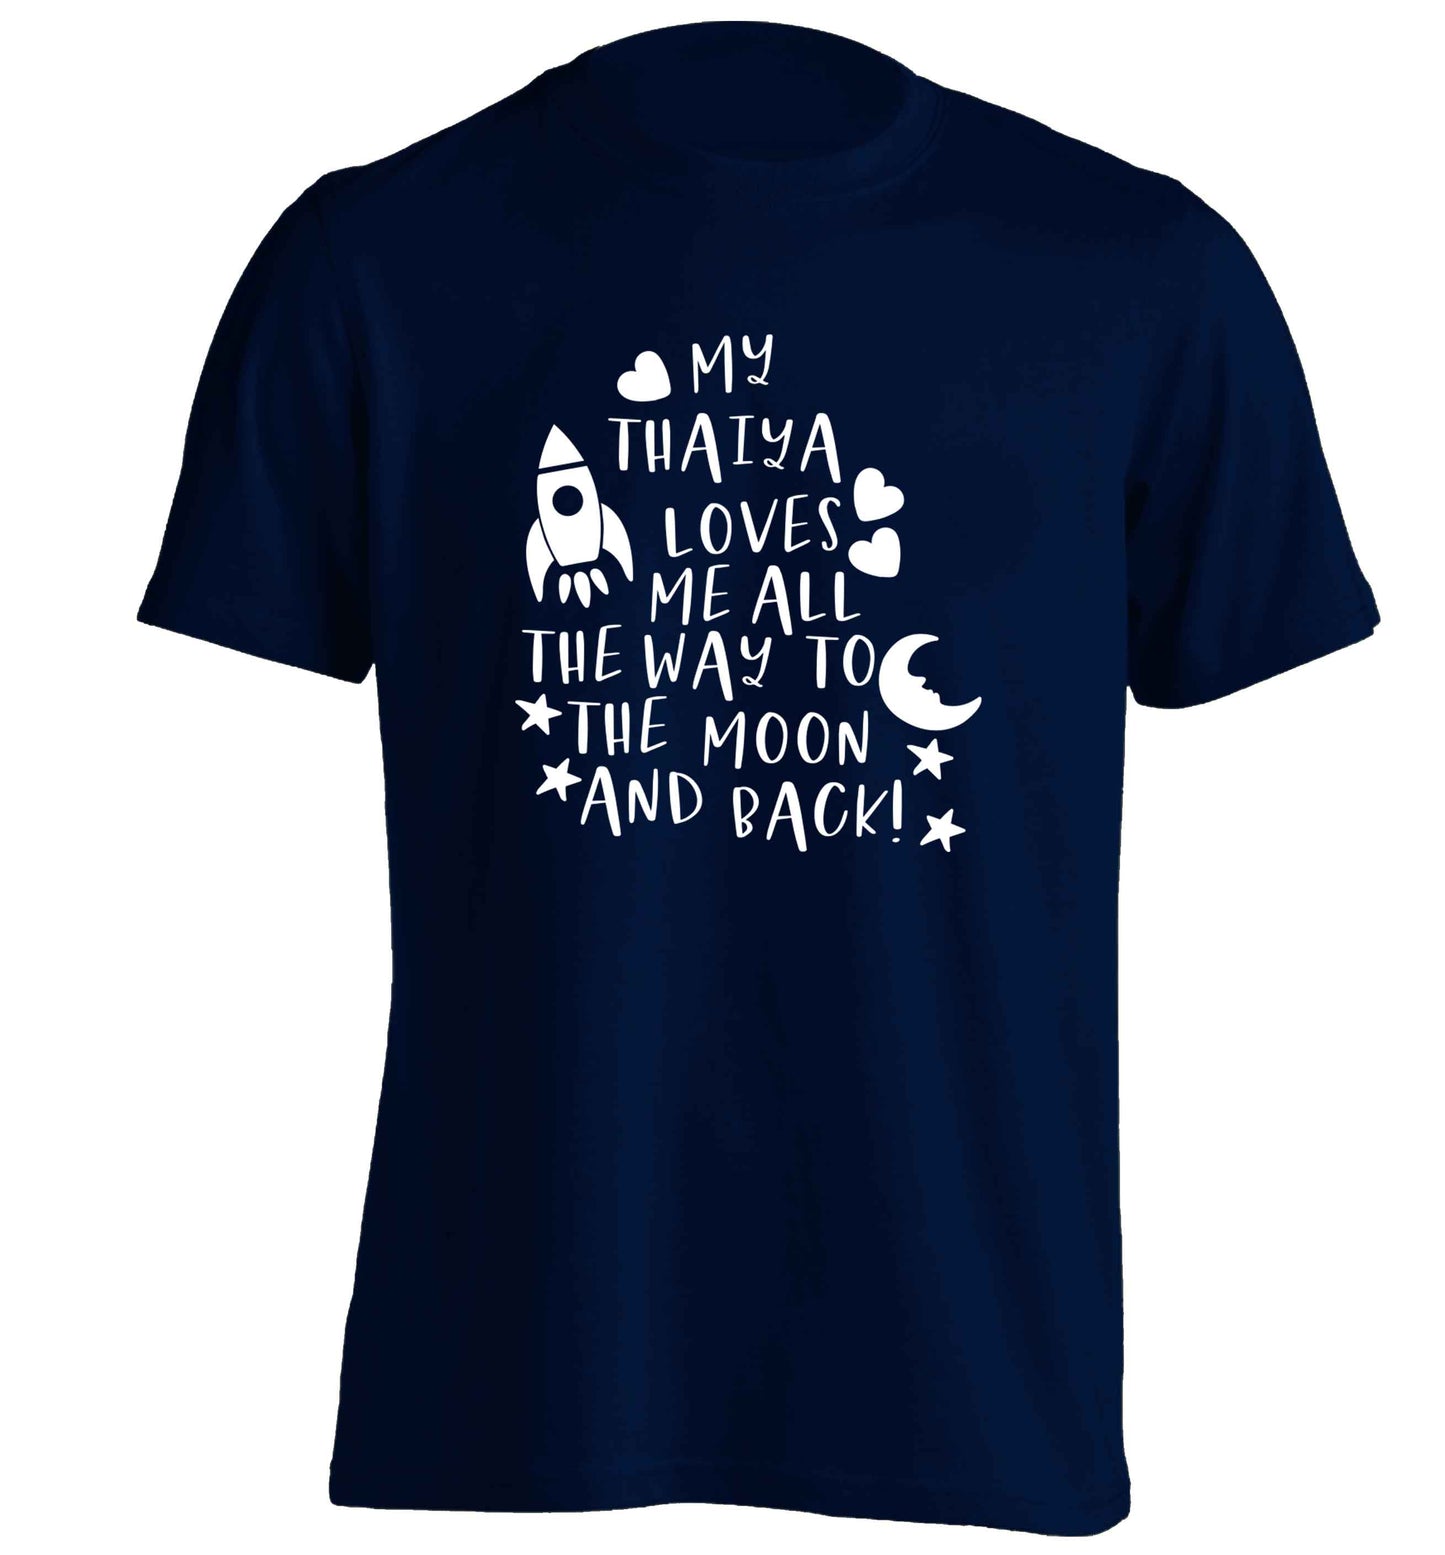 My thaiya loves me all the way to the moon and back adults unisex navy Tshirt 2XL